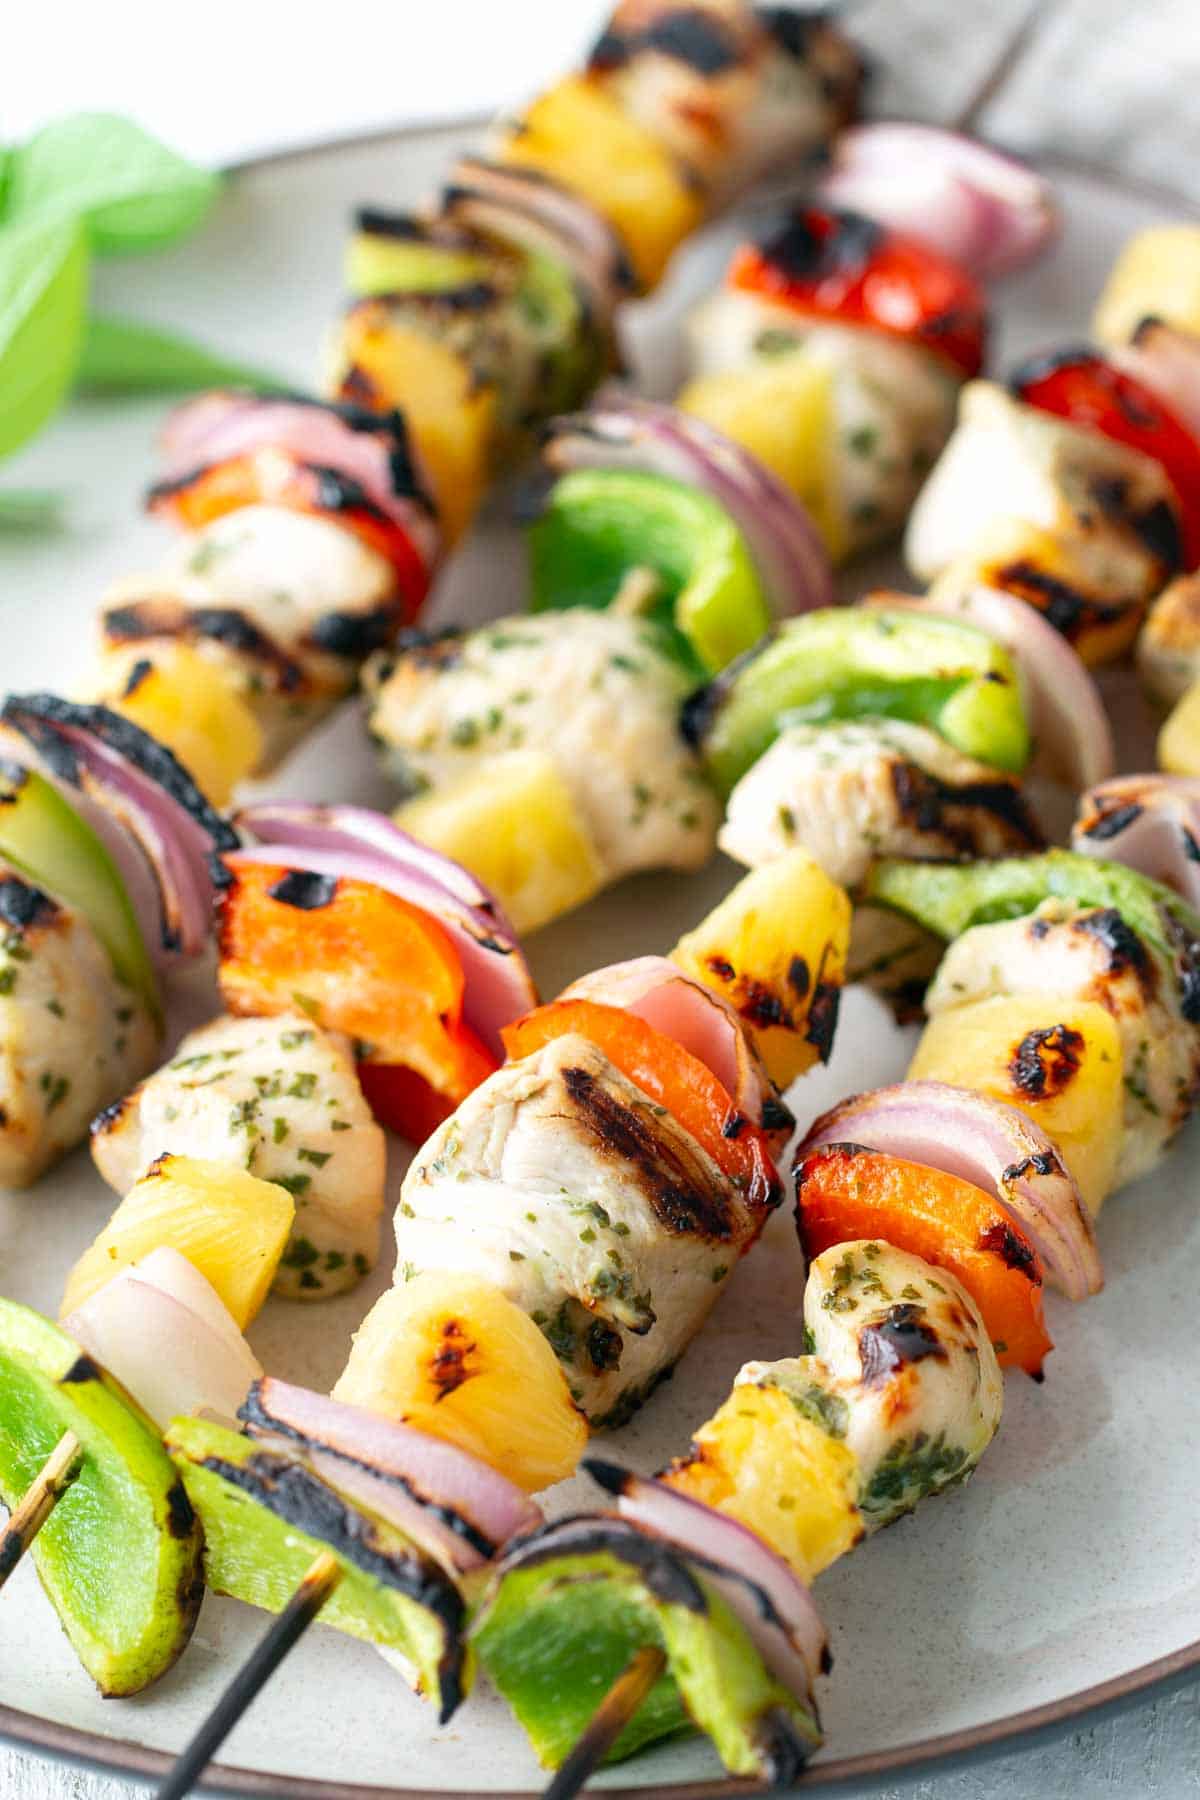 Grilled chicken skewers with colorful vegetables and pineapple chunks, arranged on a plate.